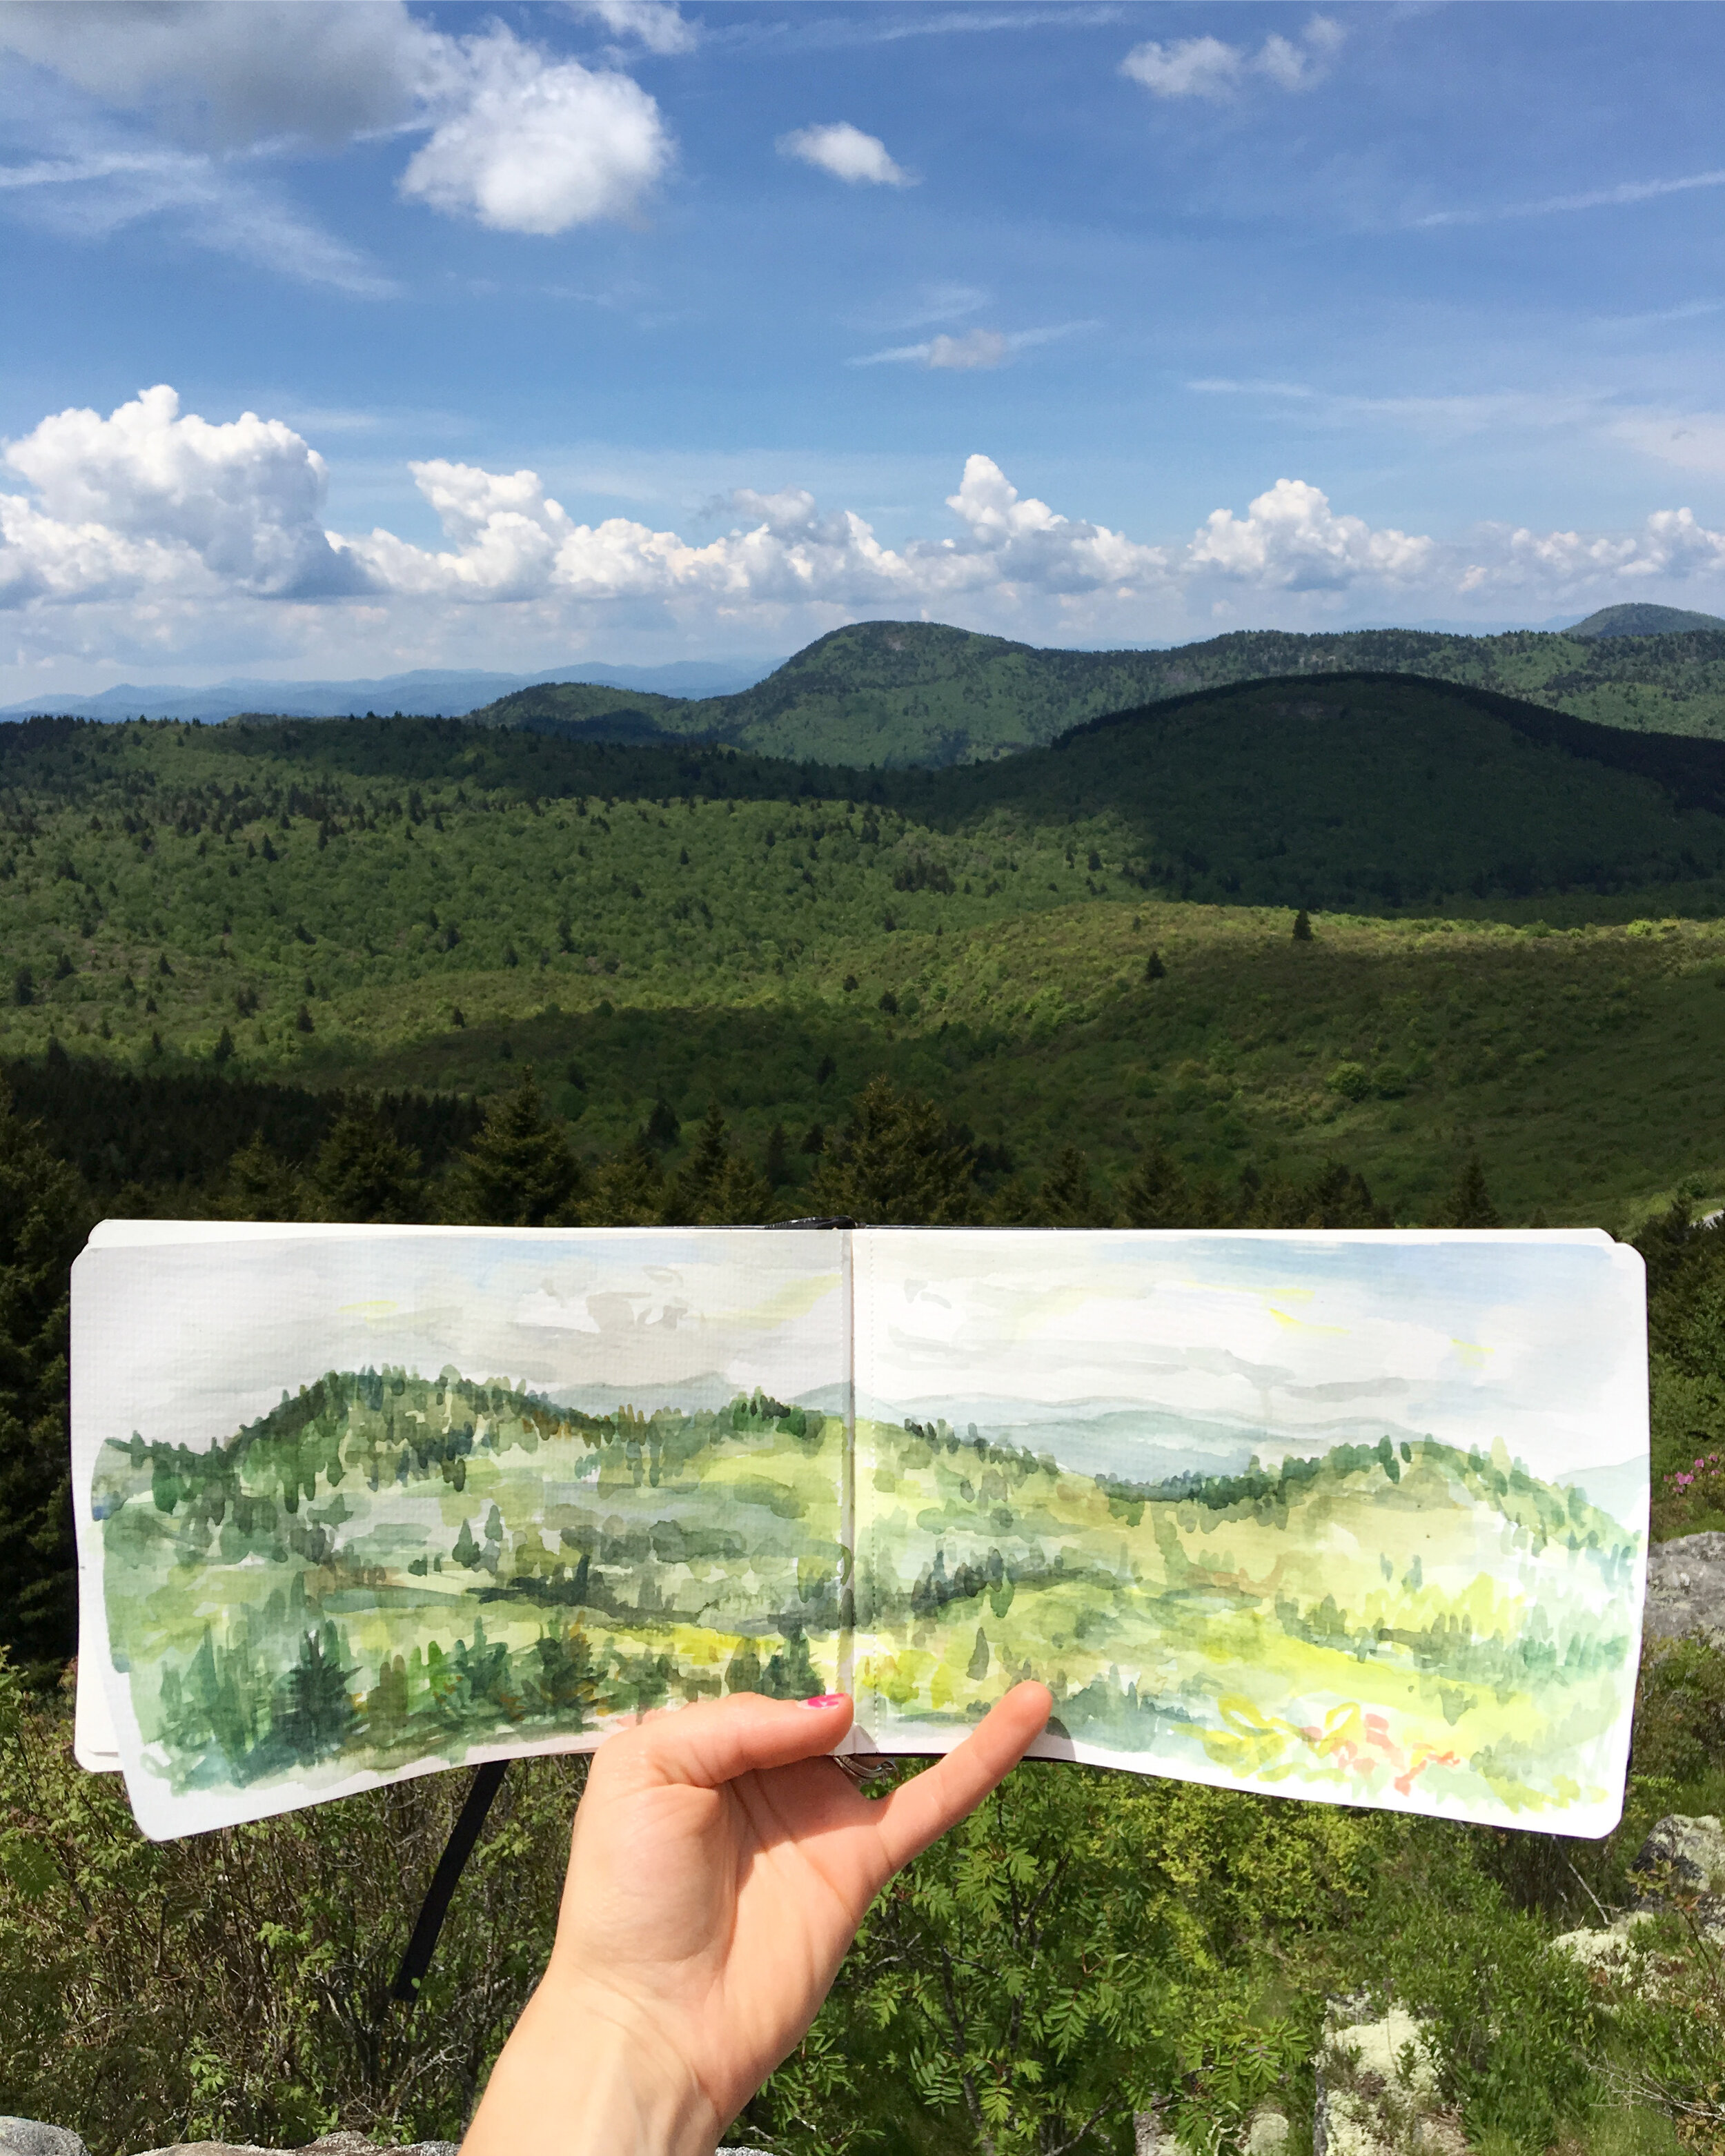 Remembering sunny days on mountaintops and making a goal for myself to use that sketchbook.